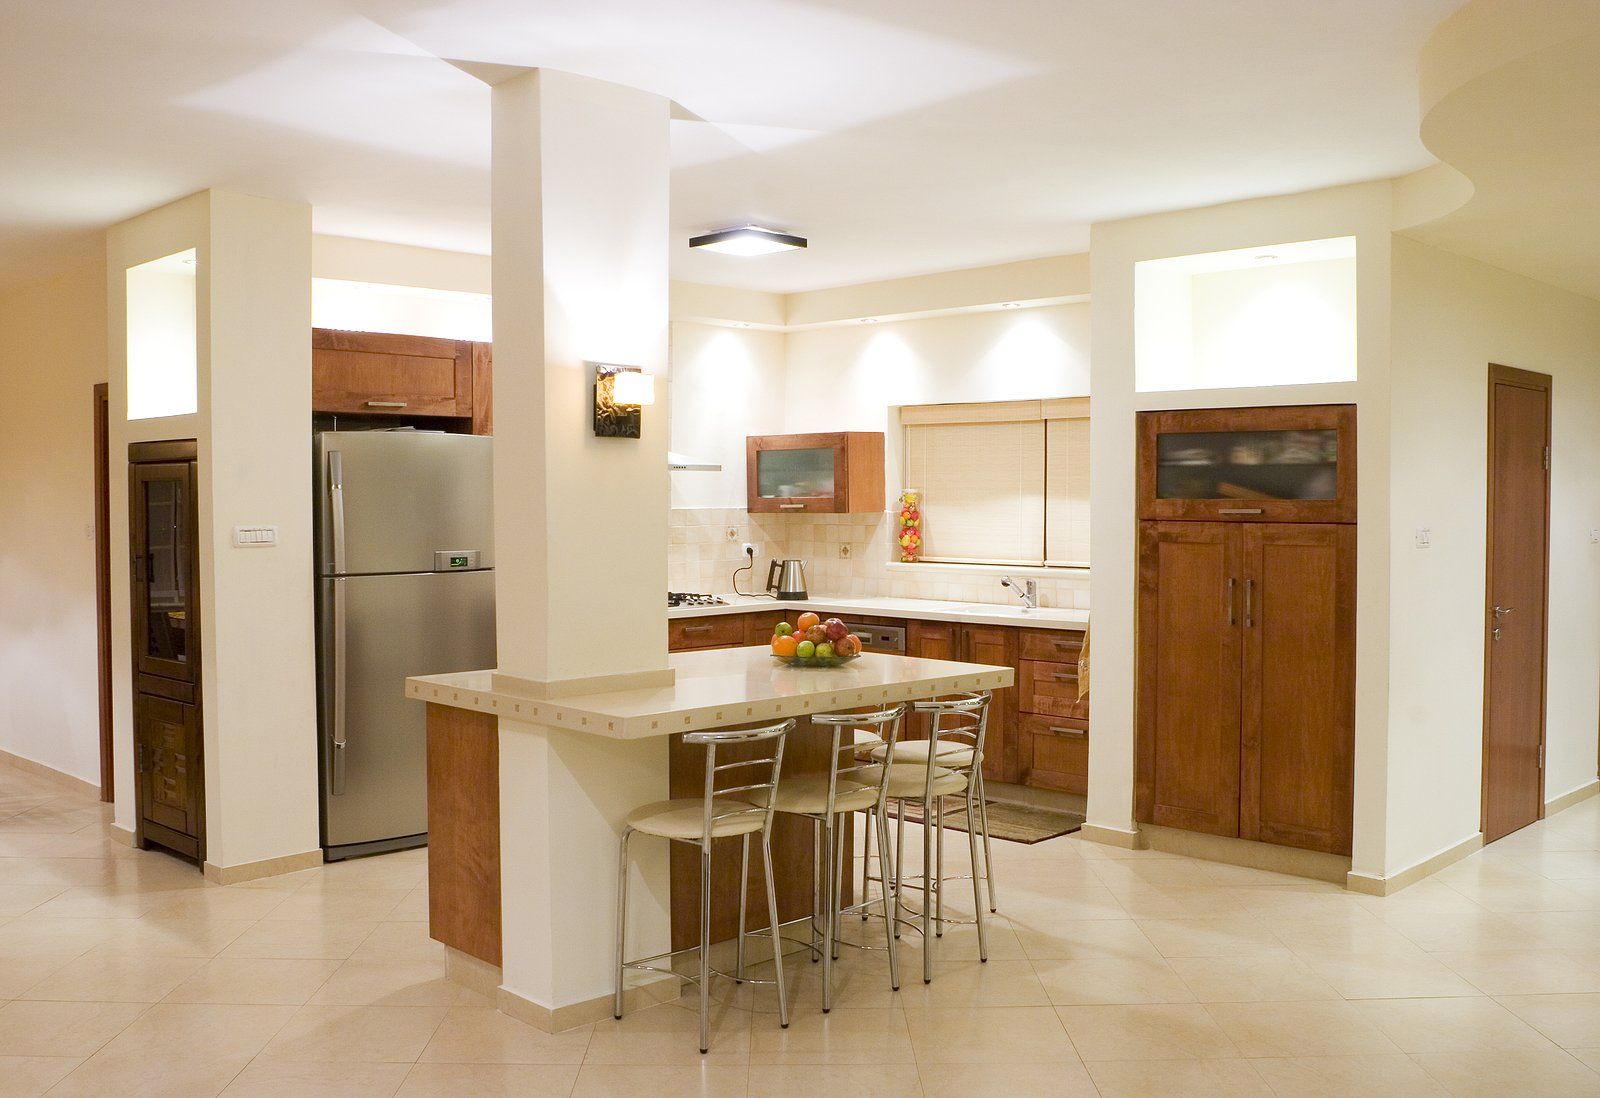 Kitchen Remodeling Services Near You